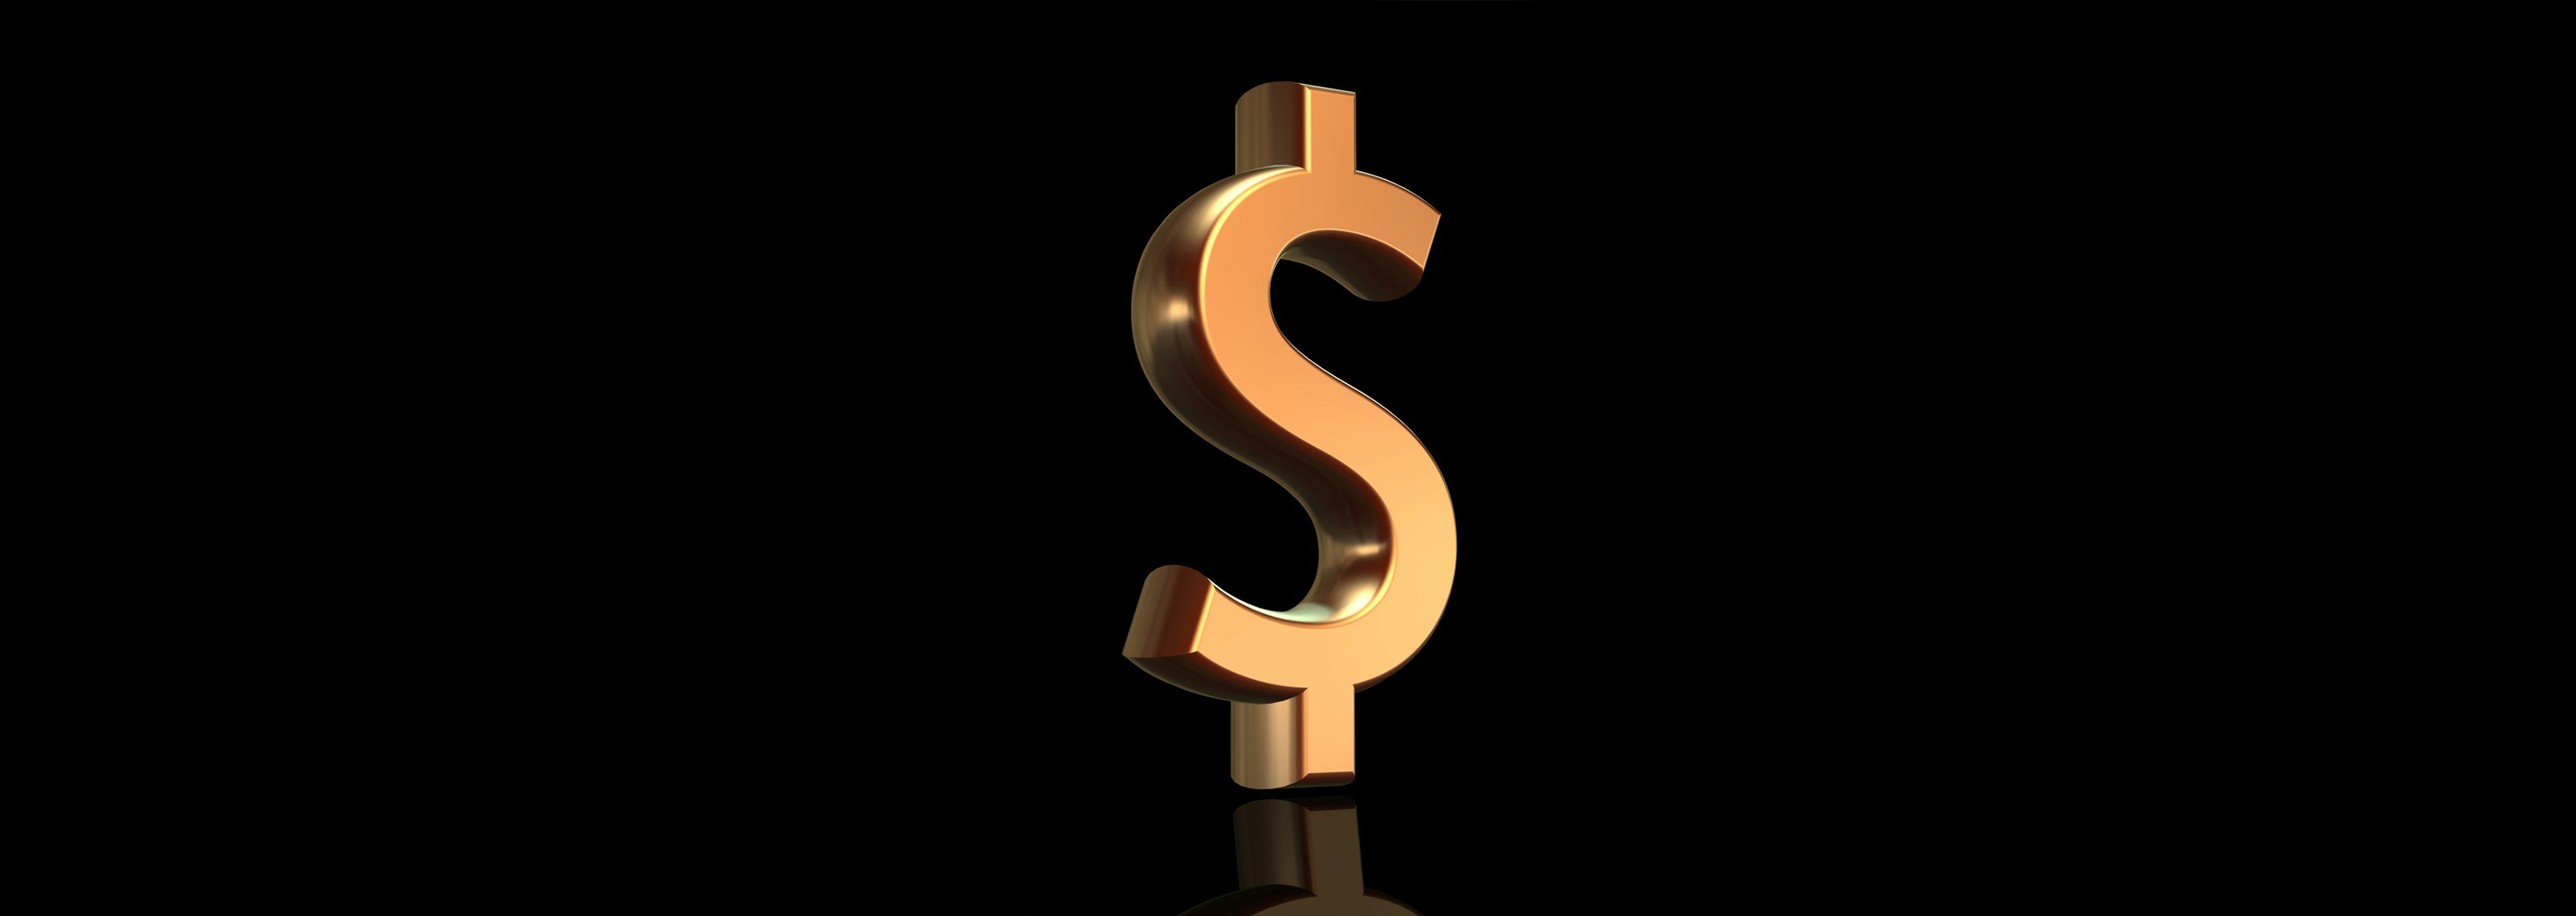 Image of a golden dollar sign. 